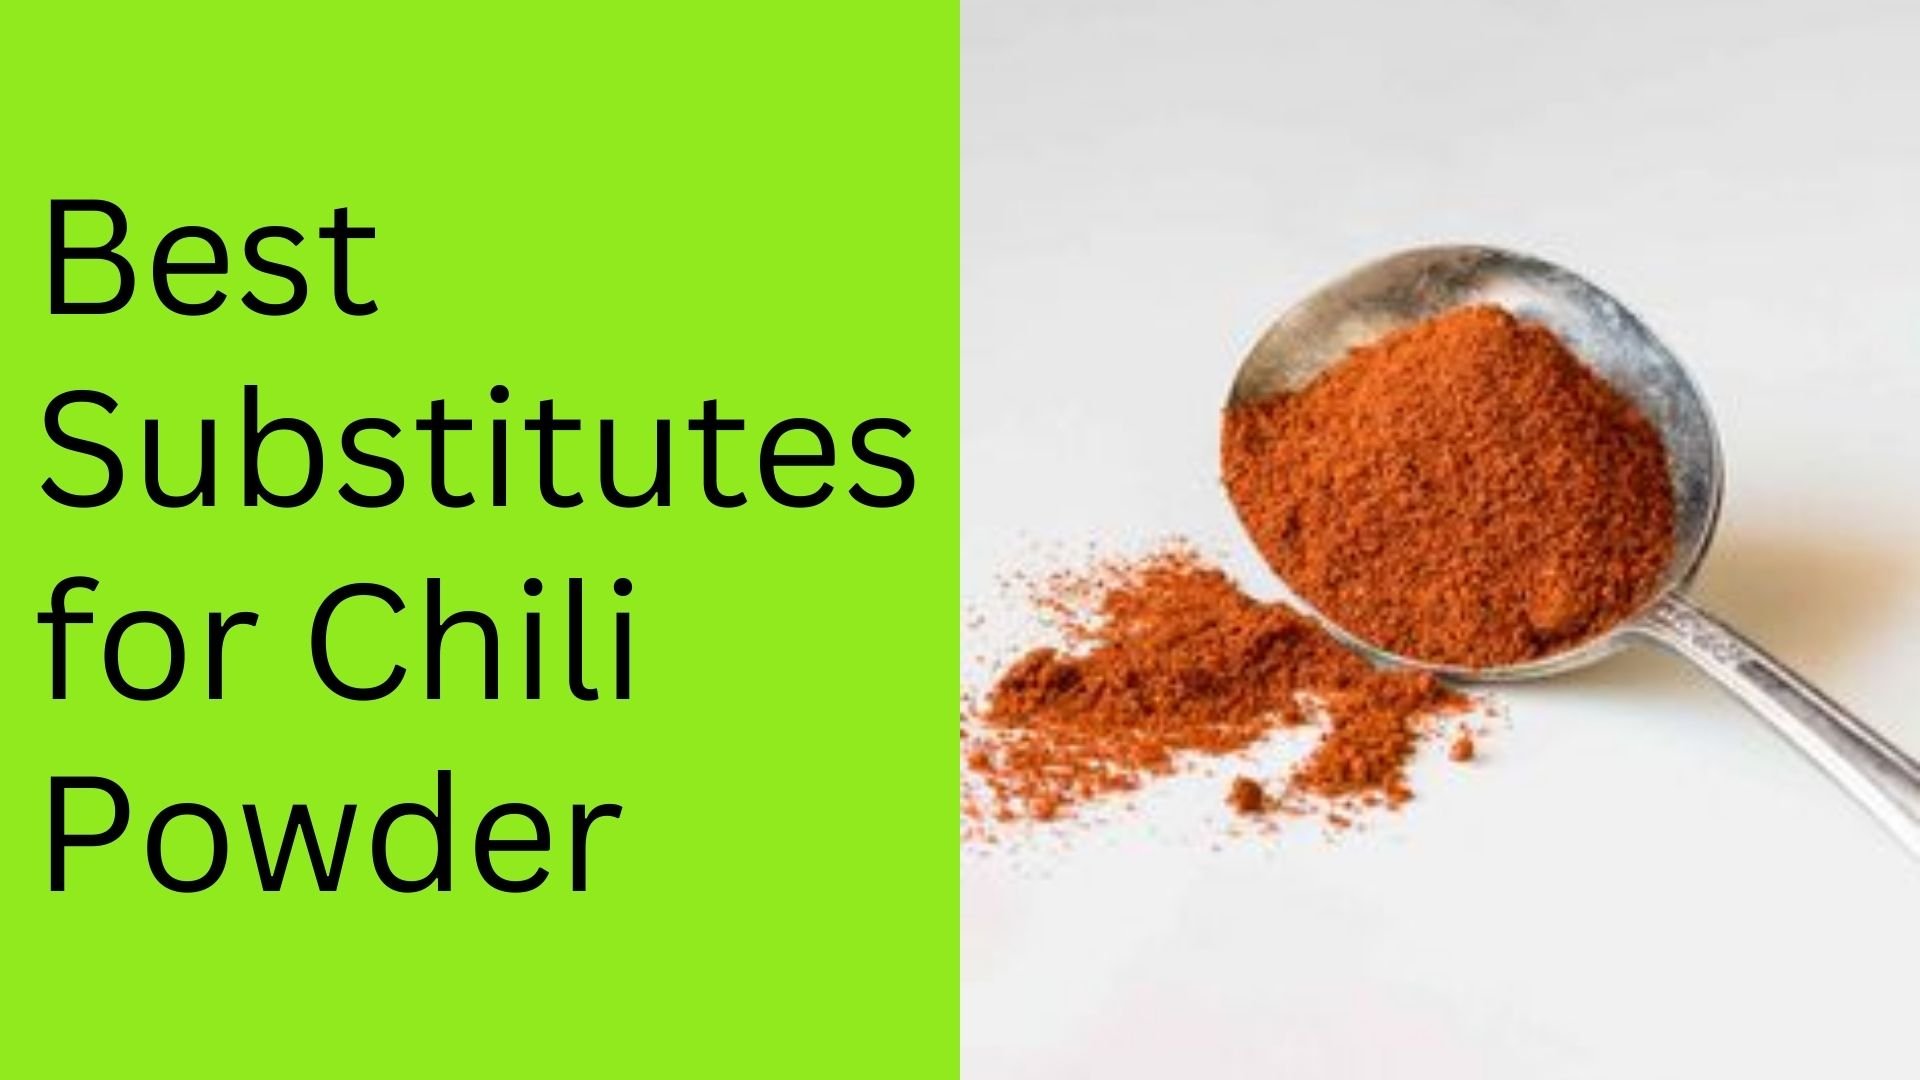 Best Substitutes for Chili Powder